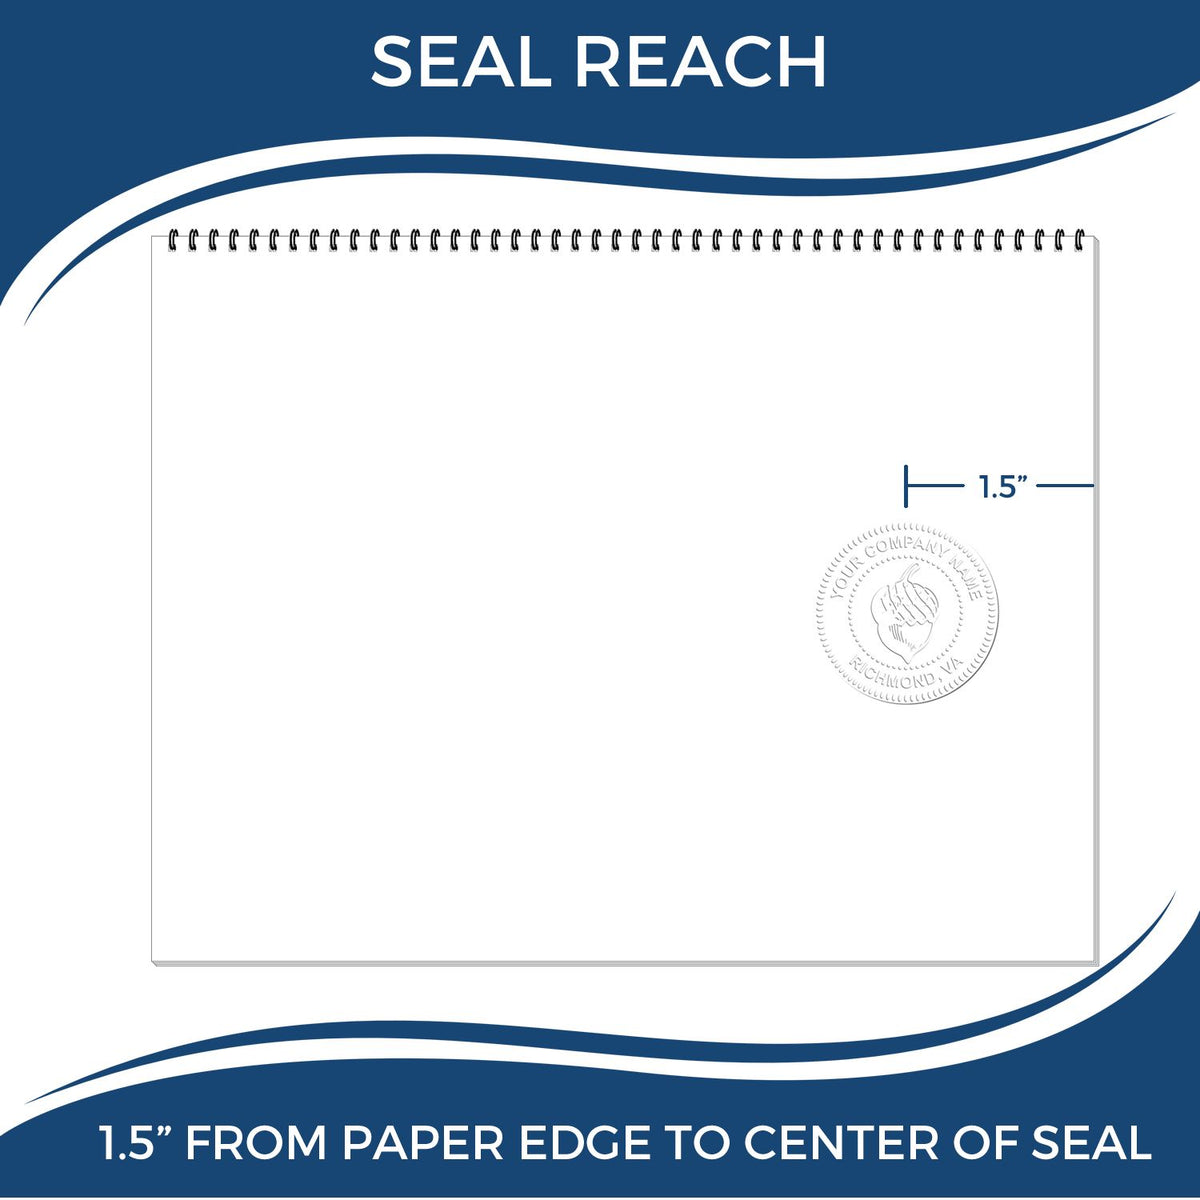 An infographic showing the seal reach which is represented by a ruler and a miniature seal image of the Handheld Missouri Professional Geologist Embosser